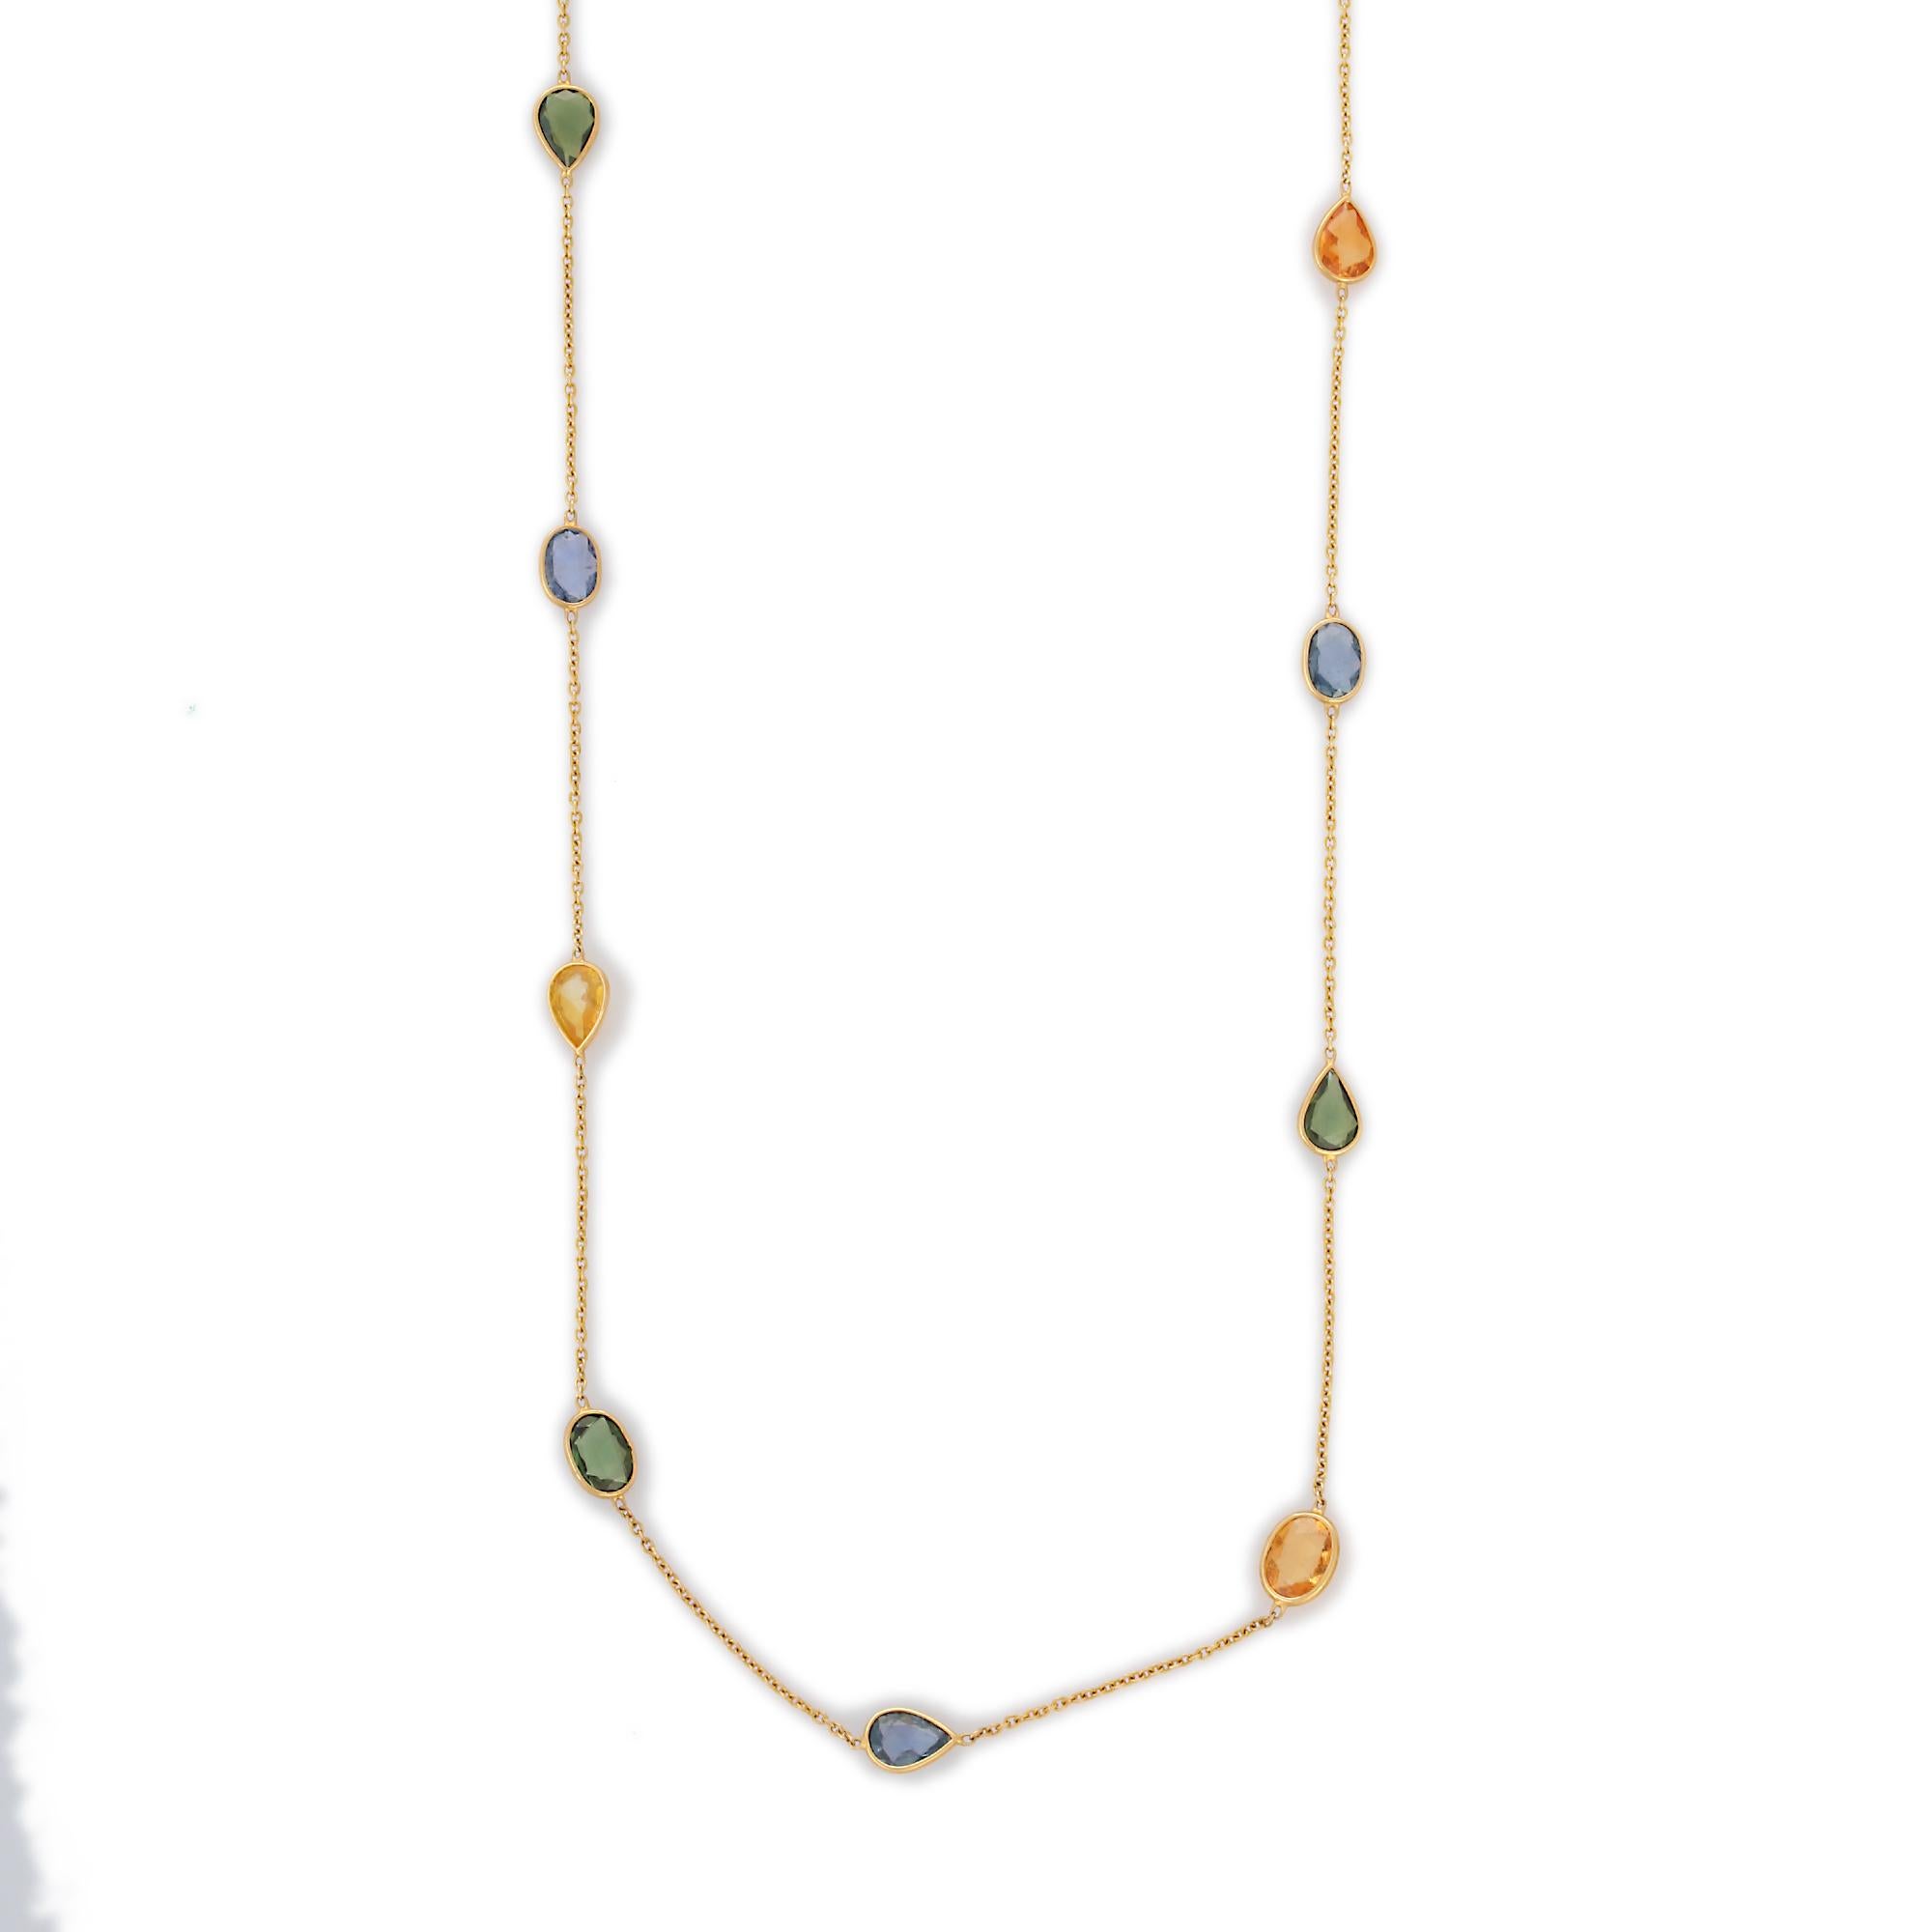 Women's Modernist 12.16 Ct Multi Sapphire Chain Necklace in 18K Yellow Gold For Sale